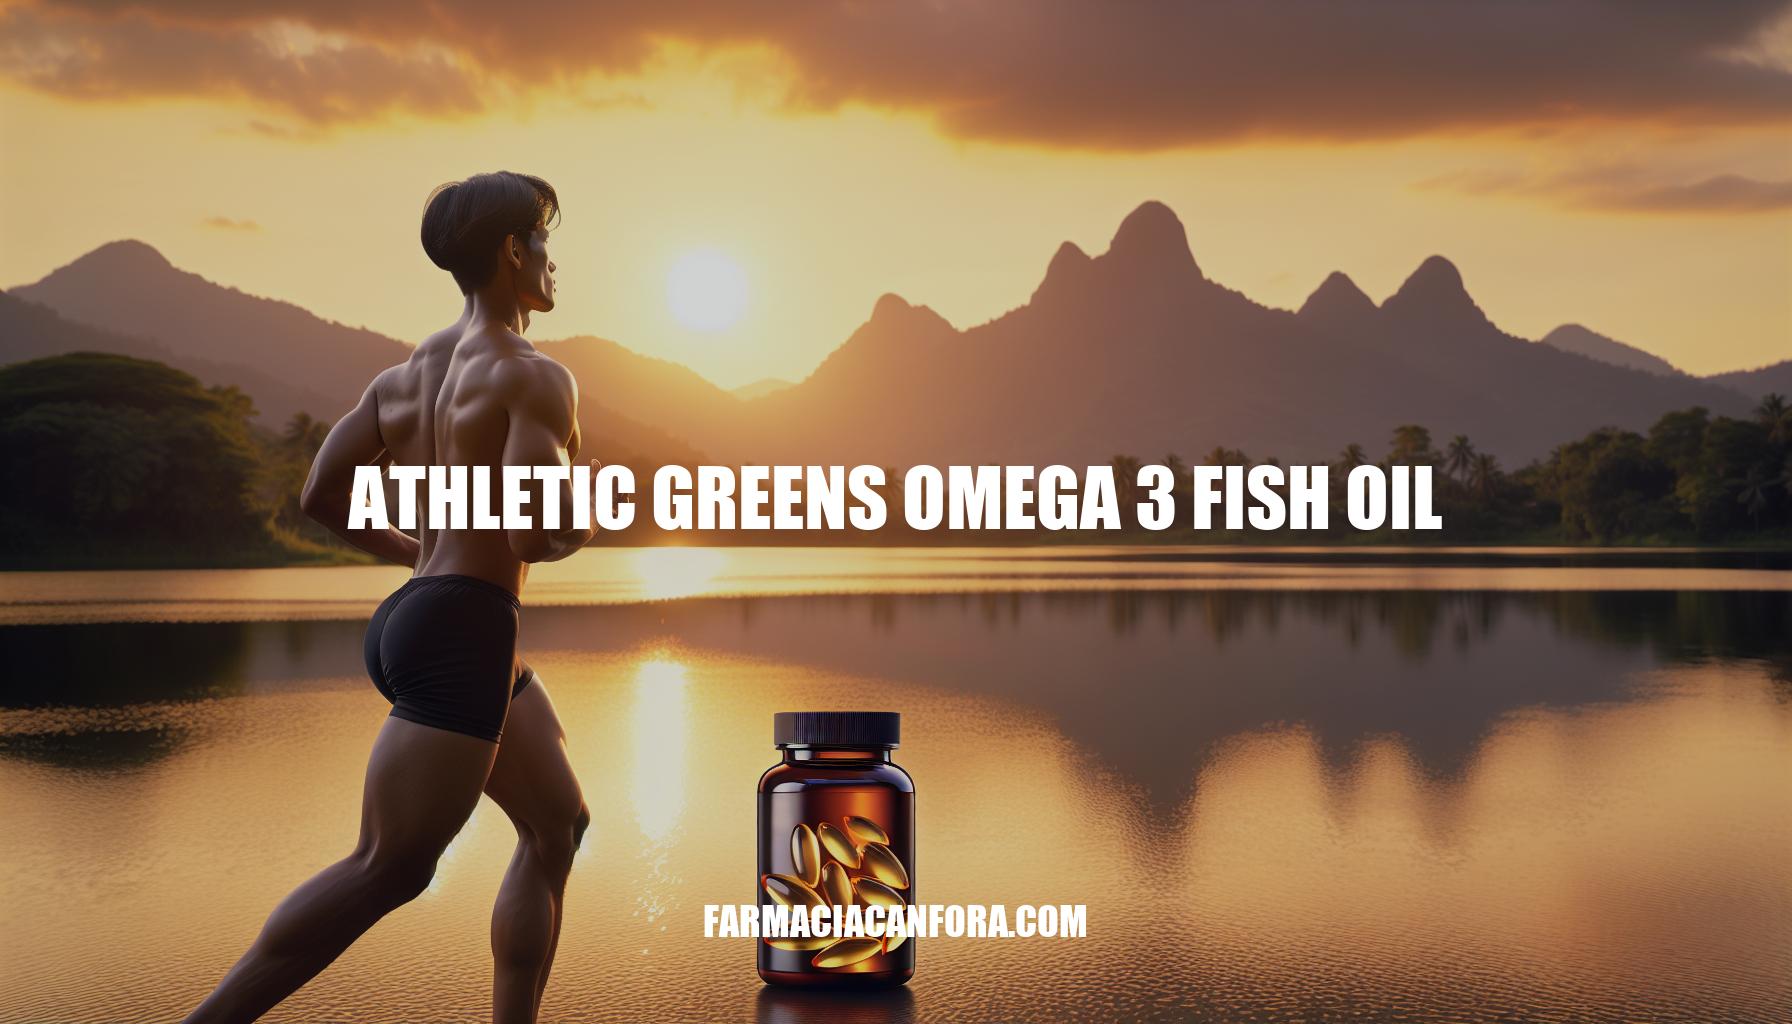 The Benefits of Athletic Greens Omega 3 Fish Oil